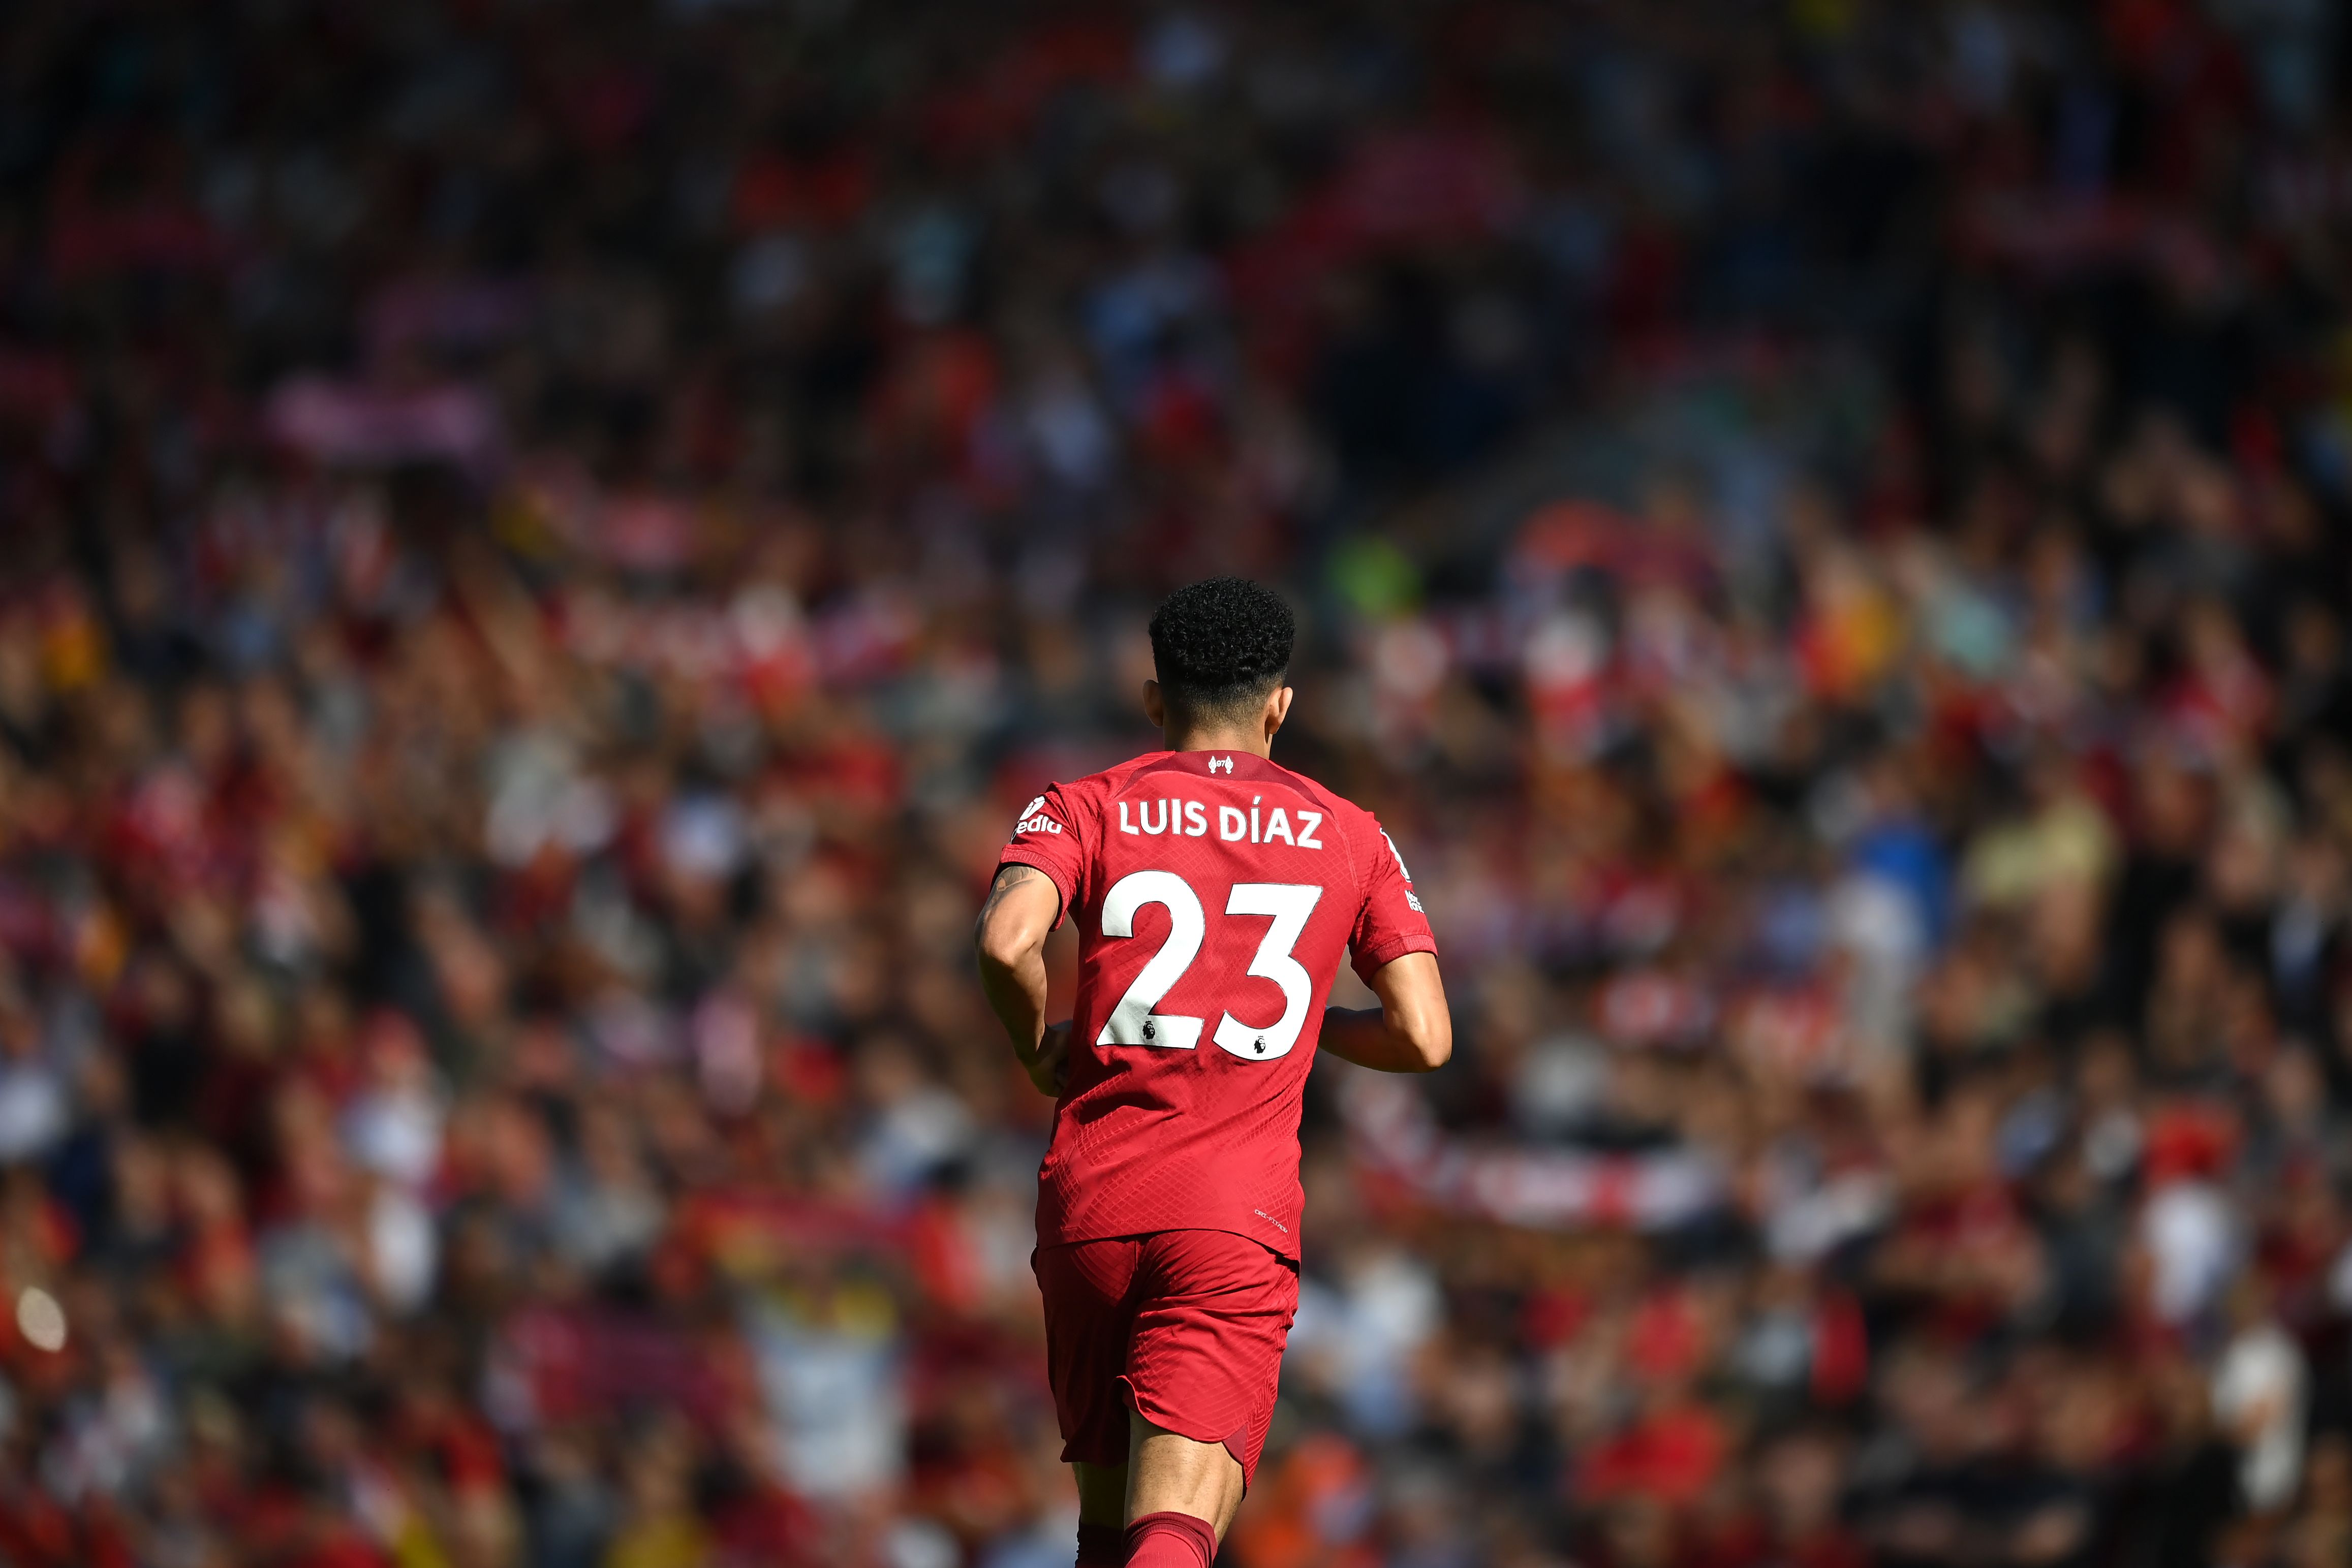 Luis Diaz of Liverpool in action during the Premier League match 